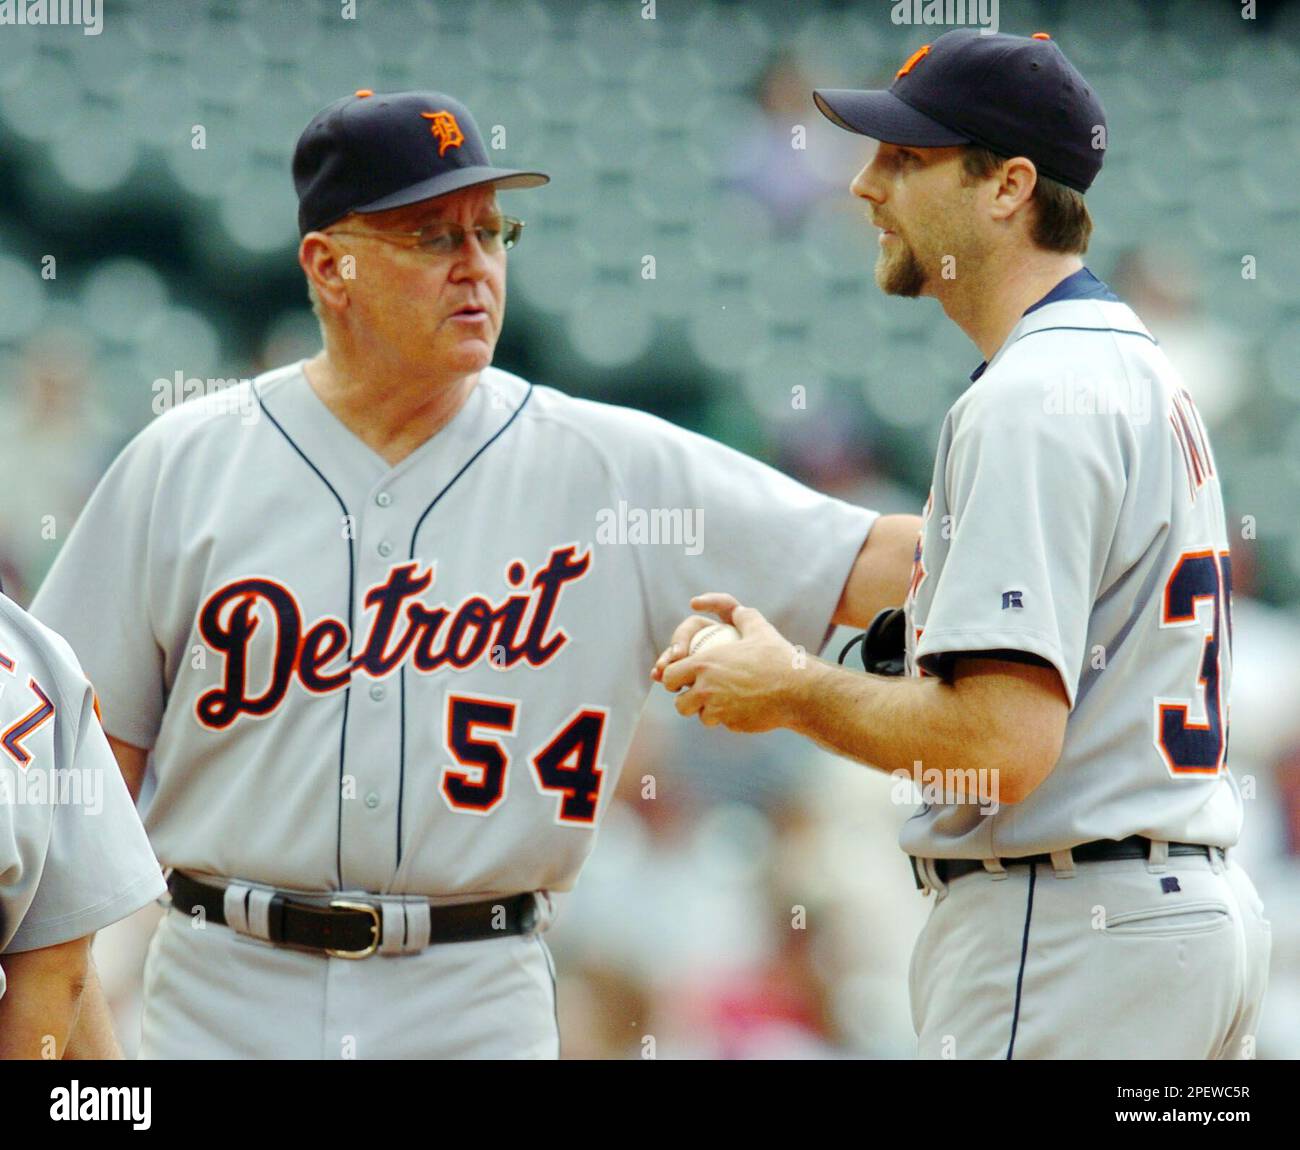 Detroit Tigers pitching coach Bob Cluck, left, reaches out to